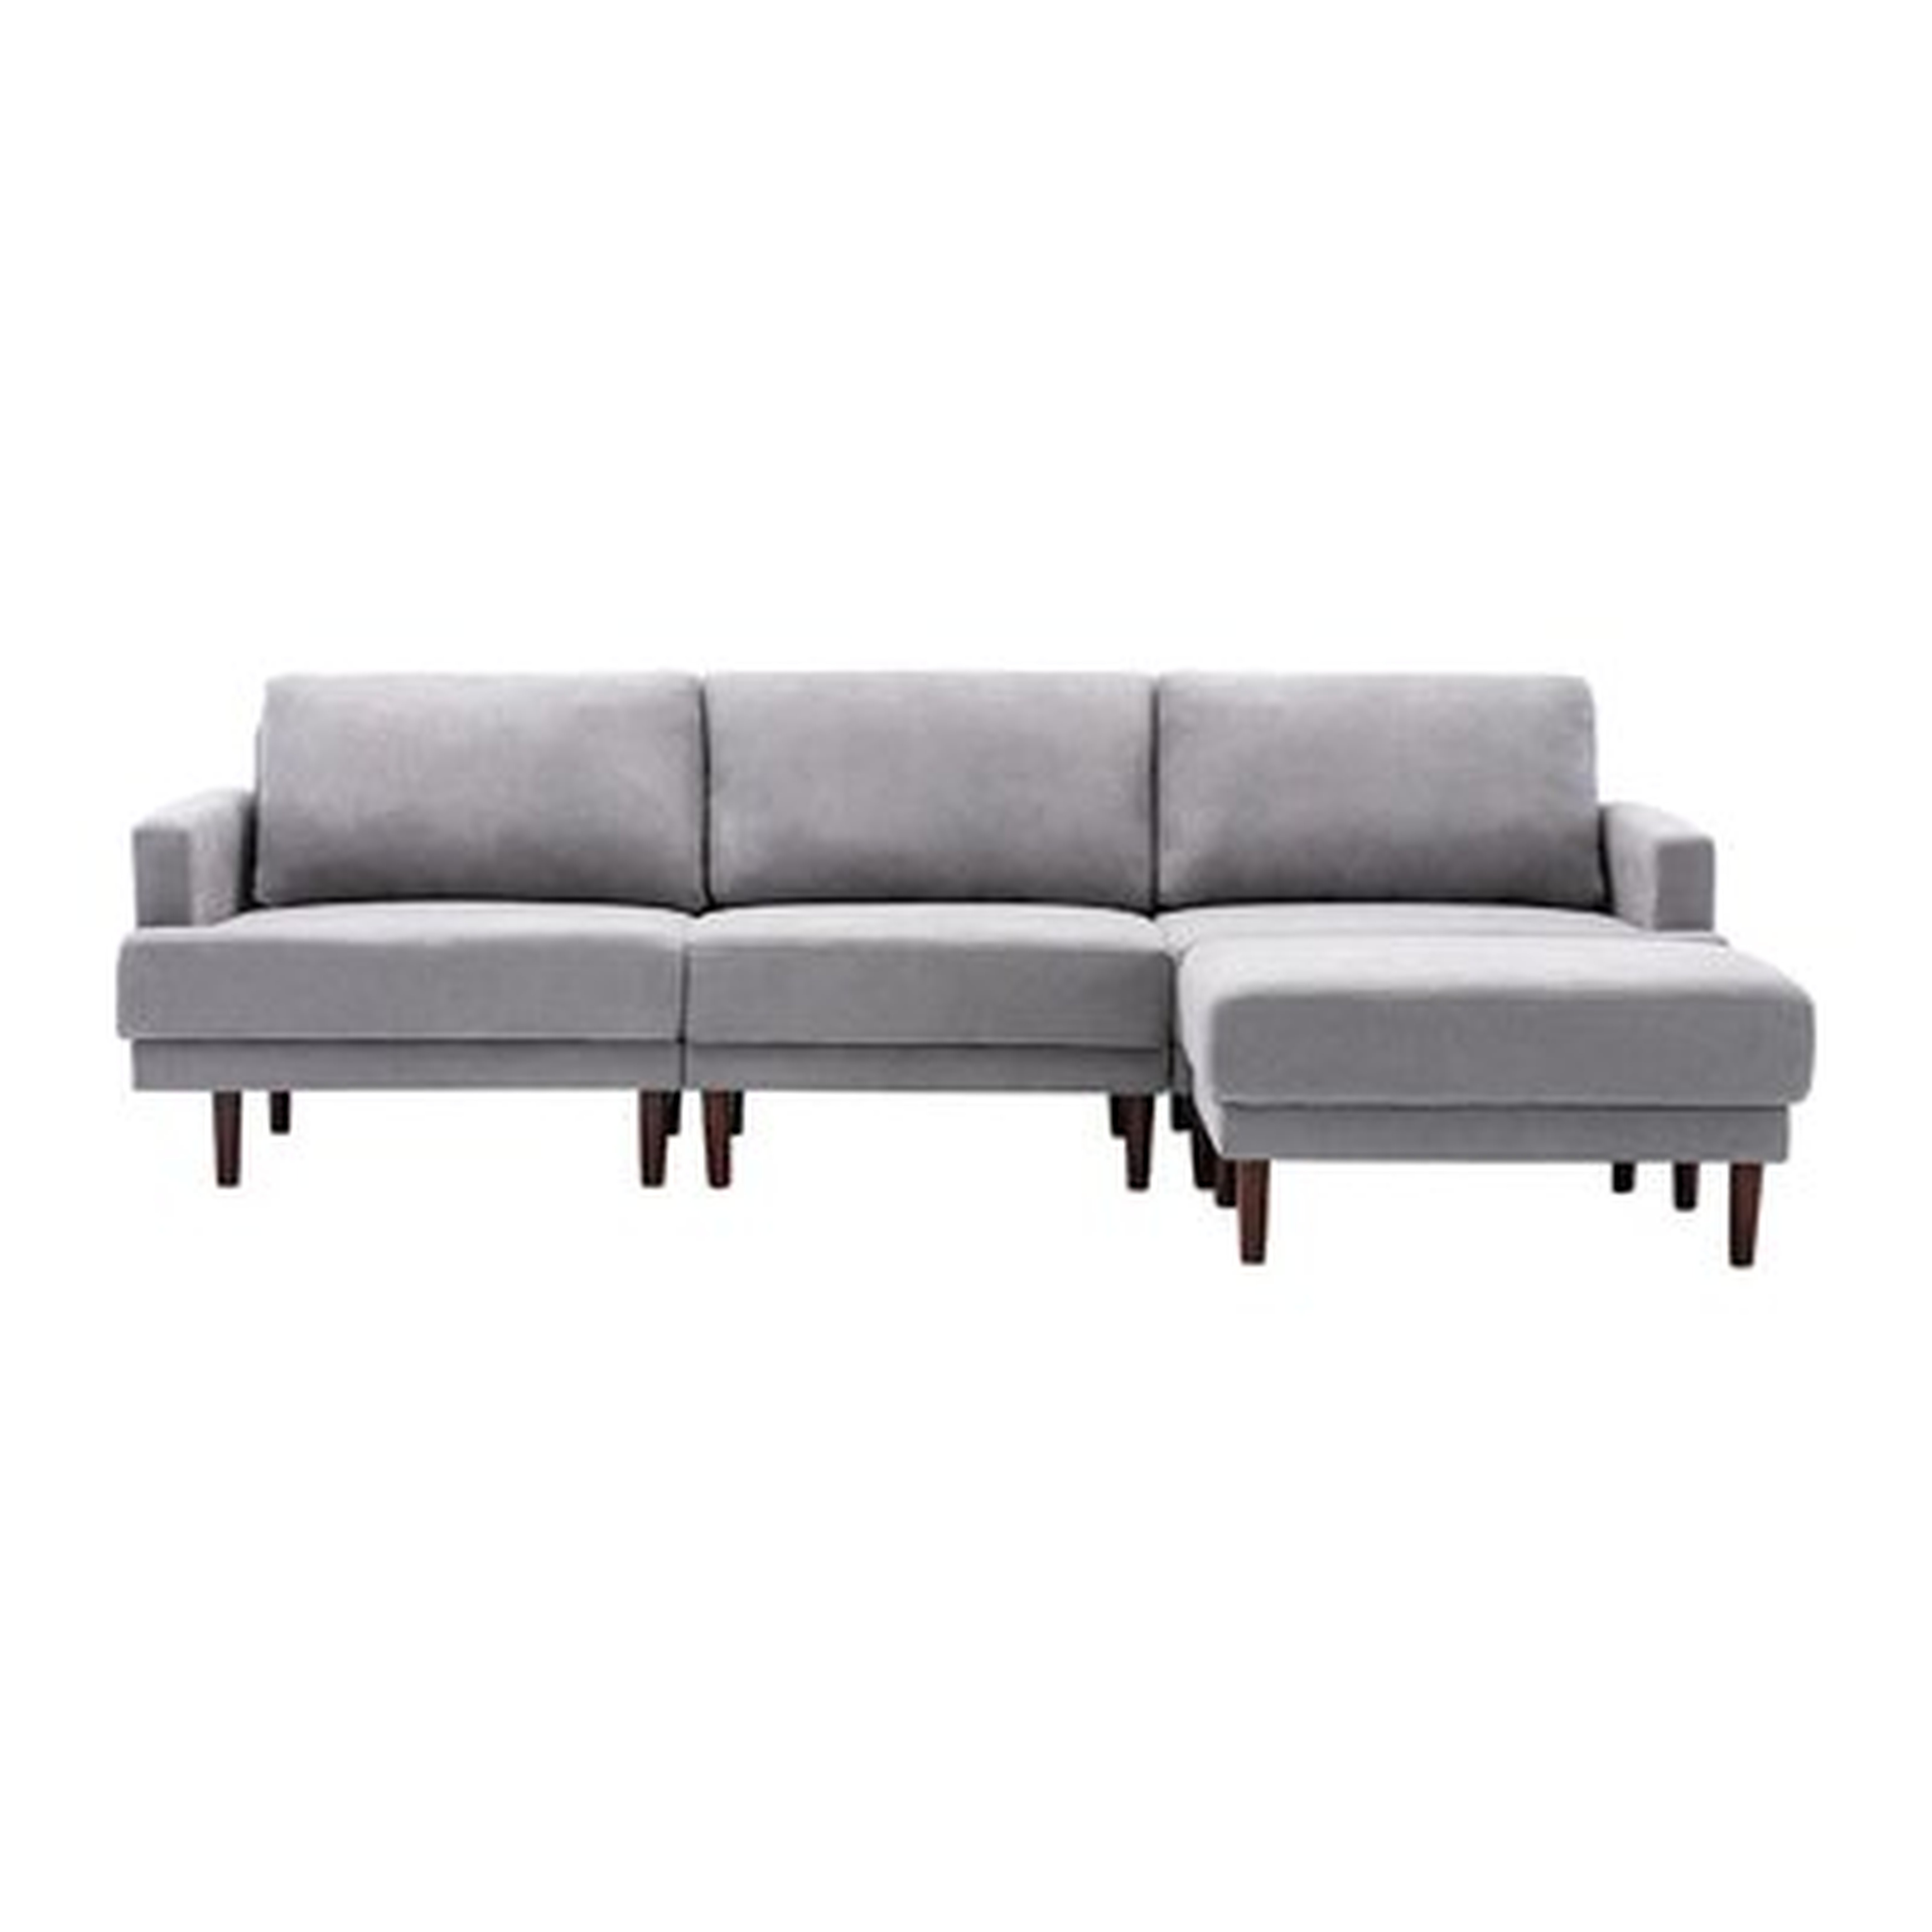 Convertible Combined Sleeper Fabric Sofa, L-Shaped Reclining Sofa With Wooden Legs, Fabric And Hardwood Frame Sectional Sofa - Wayfair